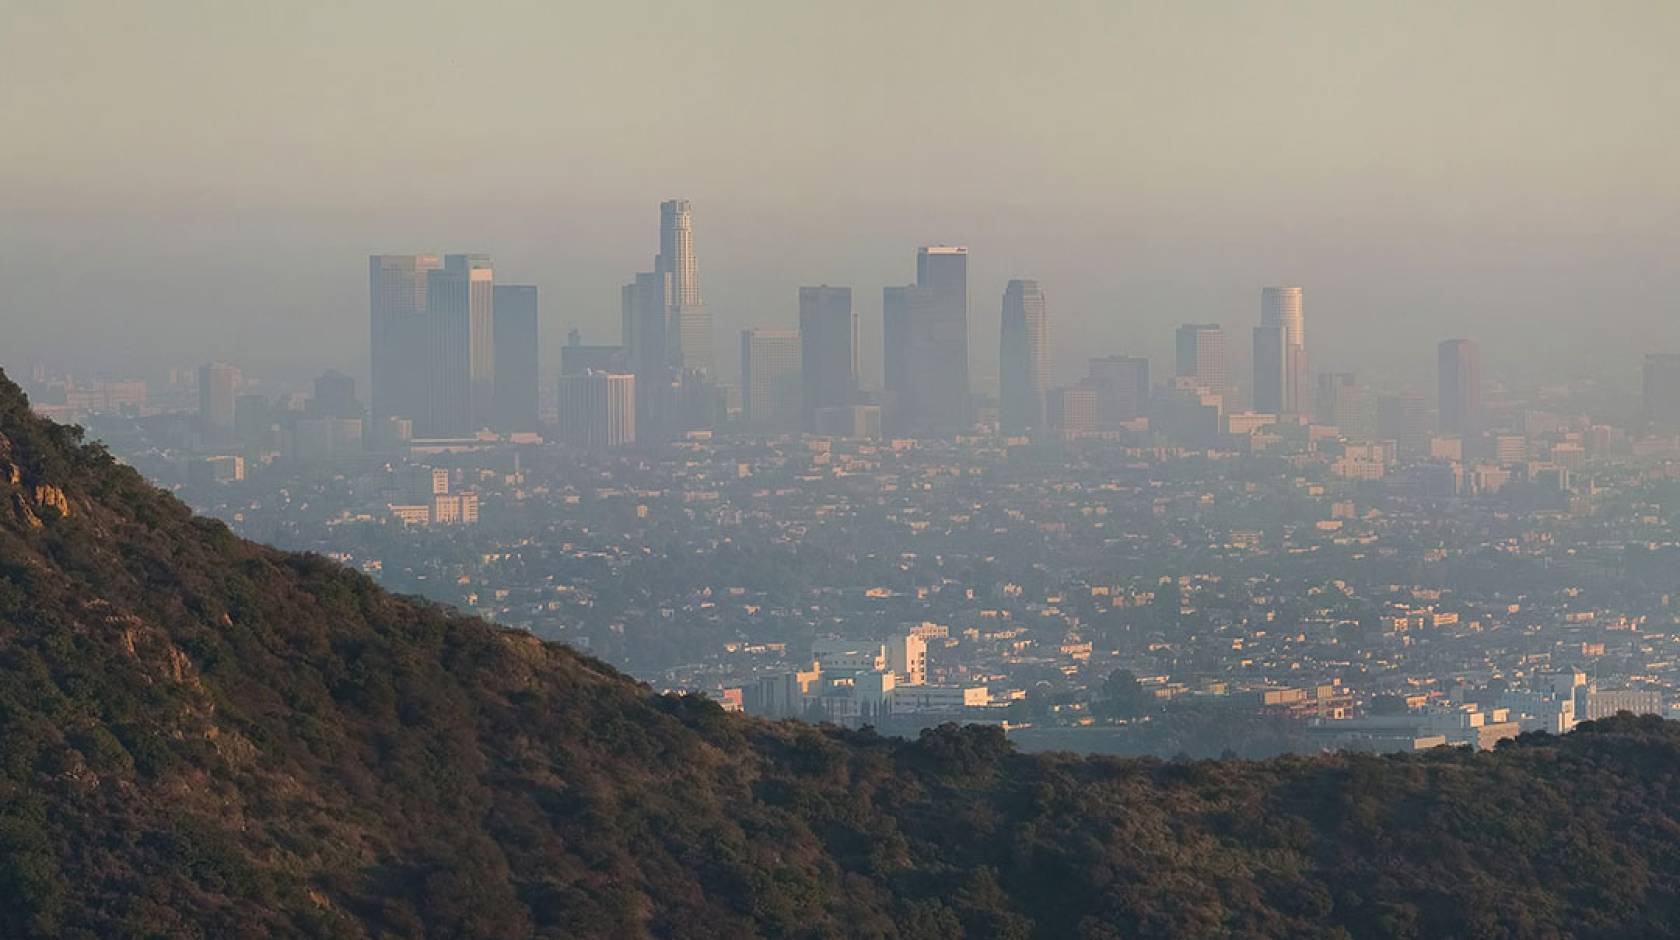 Heavy smog over Los Angeles, as seen from the mountains outside the city.